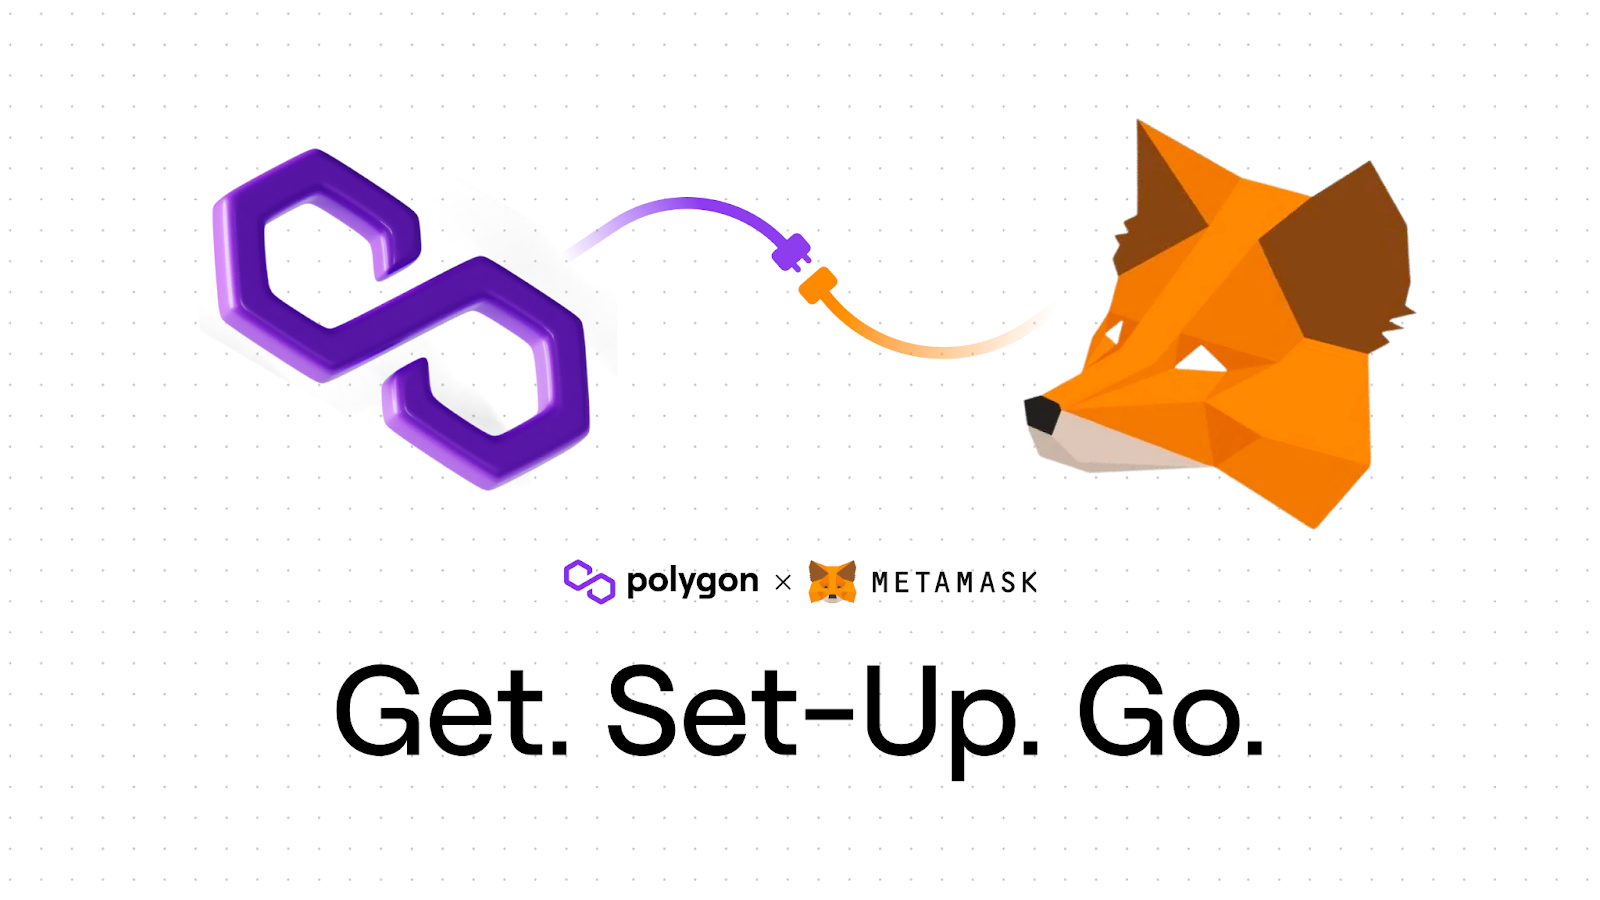 Step 3: Connect MetaMask and Polygon